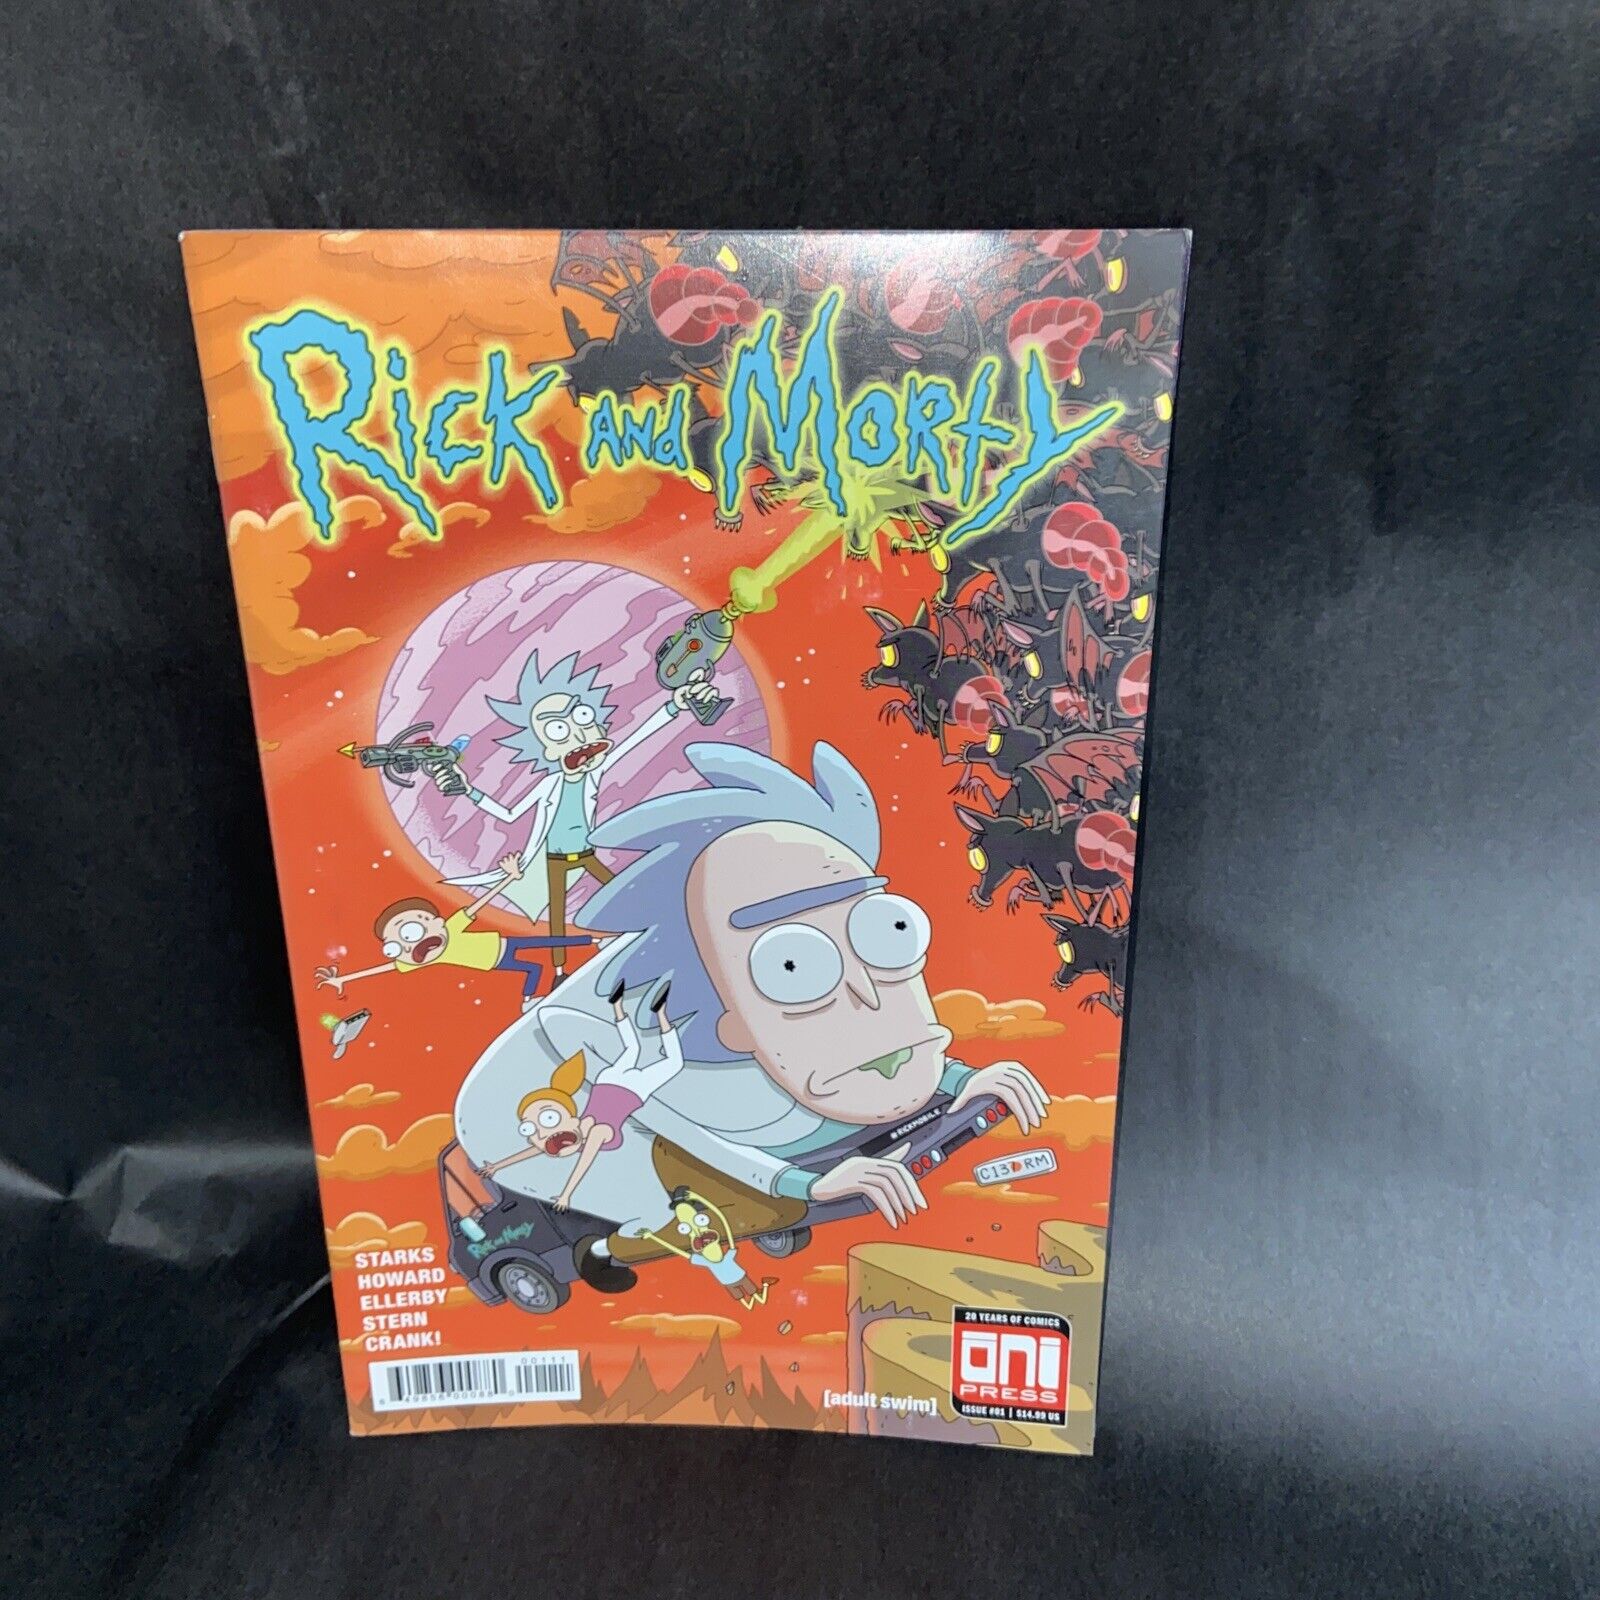 Rick and Morty Rickmobile Exclusive Special #1